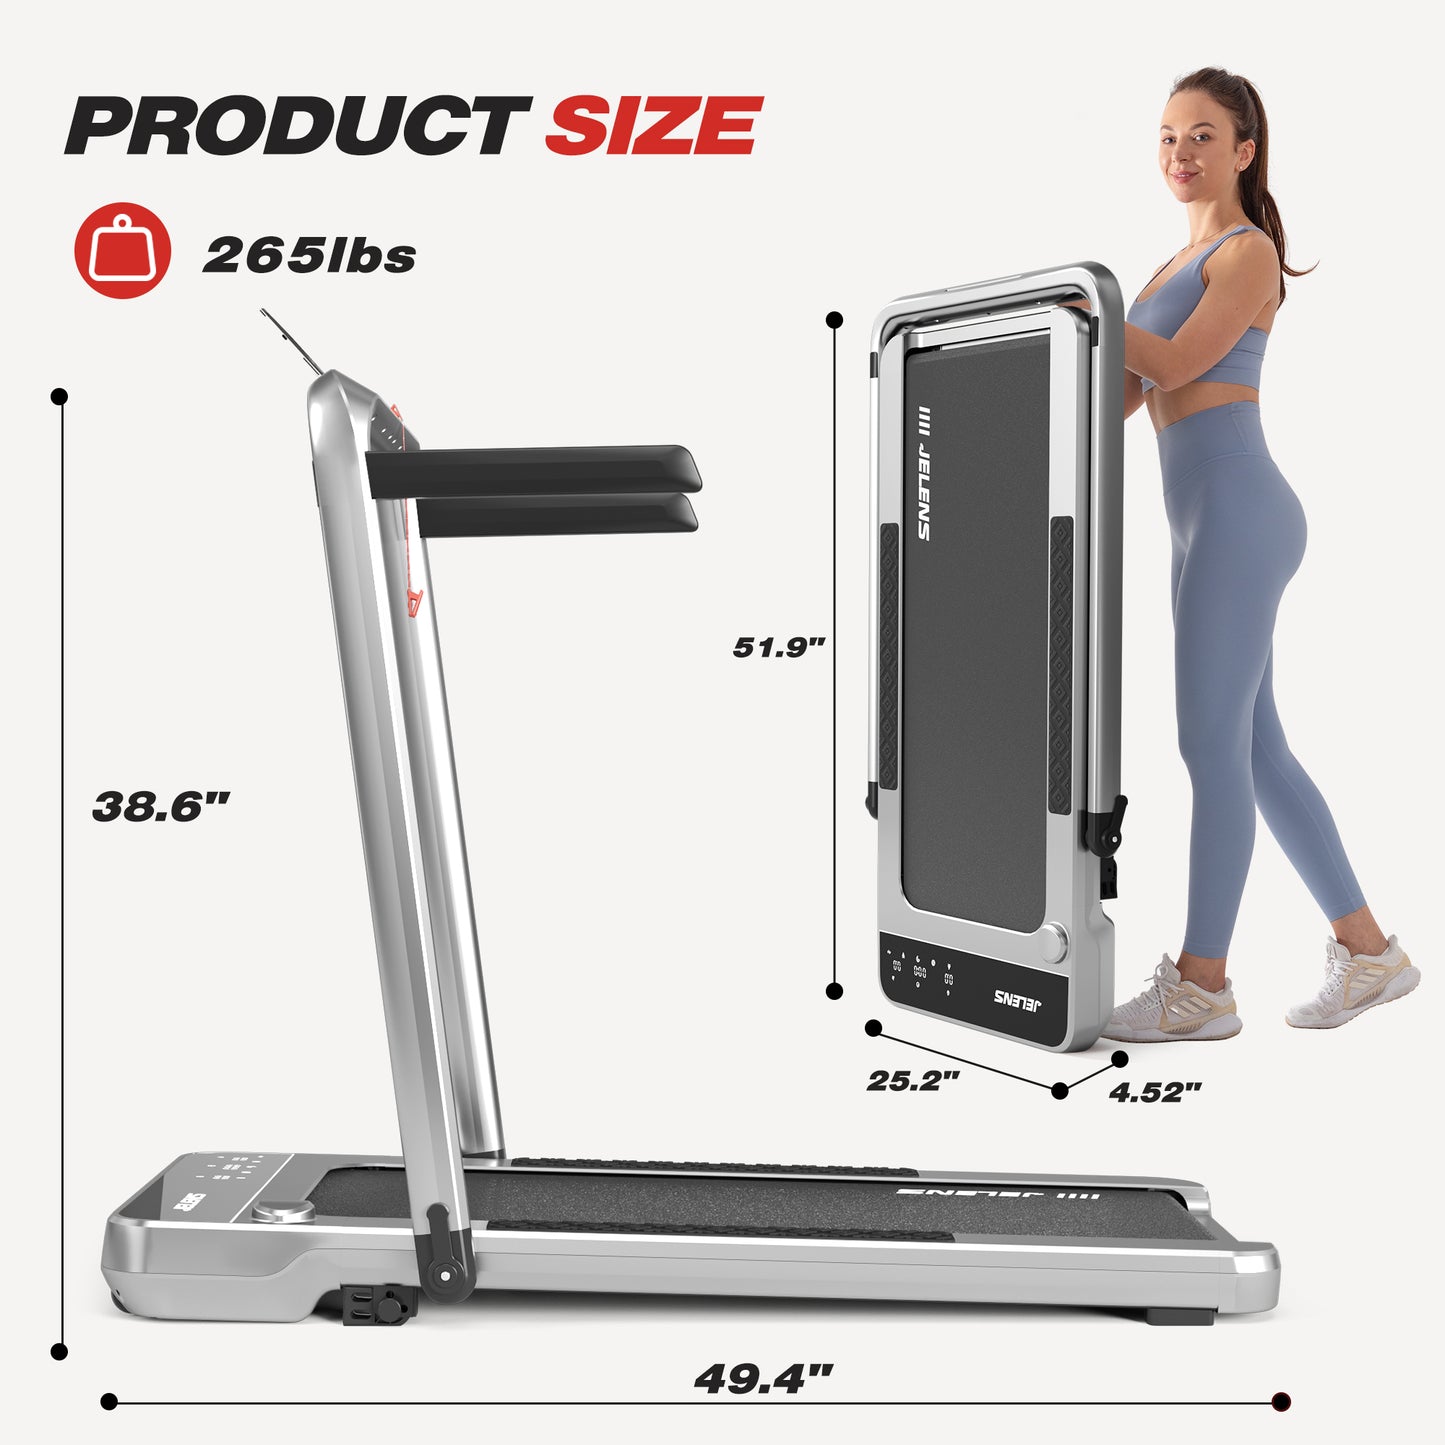 JELENS 2 in 1 Treadmill Under Desk Walking Pad 2.5HP Home Folding Treadmills with Incline and Gesture Sensing Control, Walking Machine for Office with Led Display